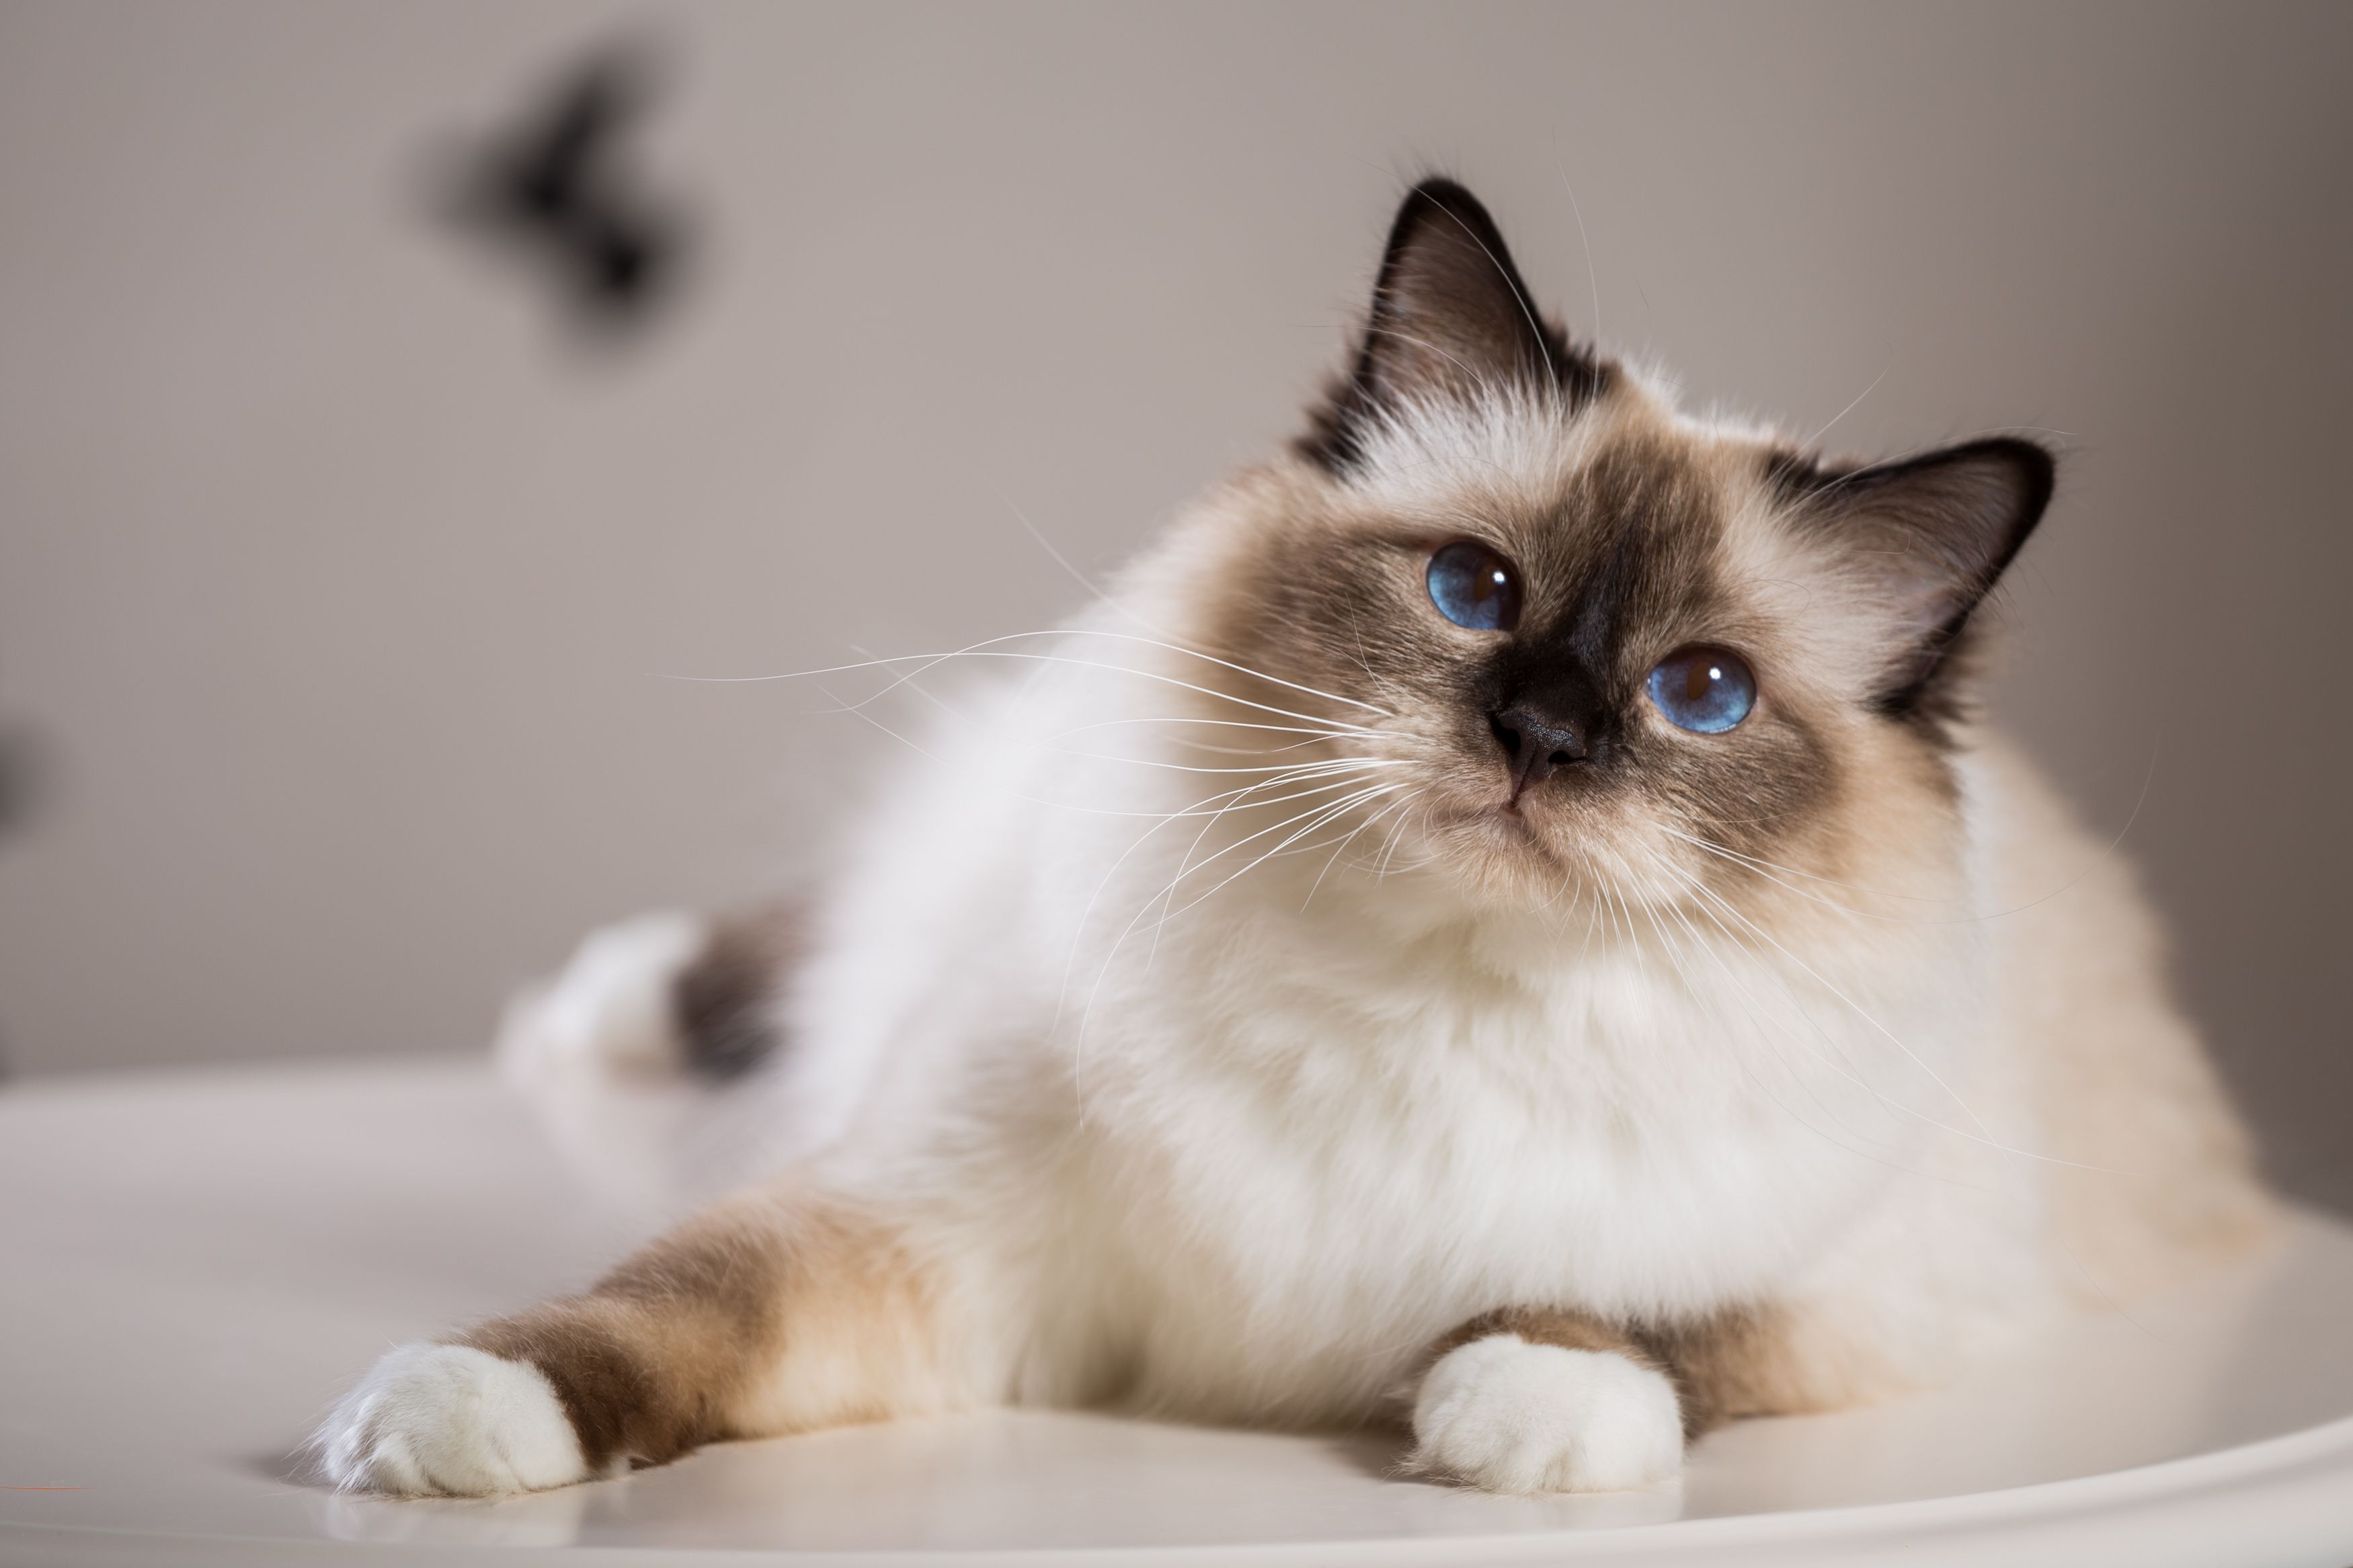 How can you tell if your cat is sick and needs veterinary attention